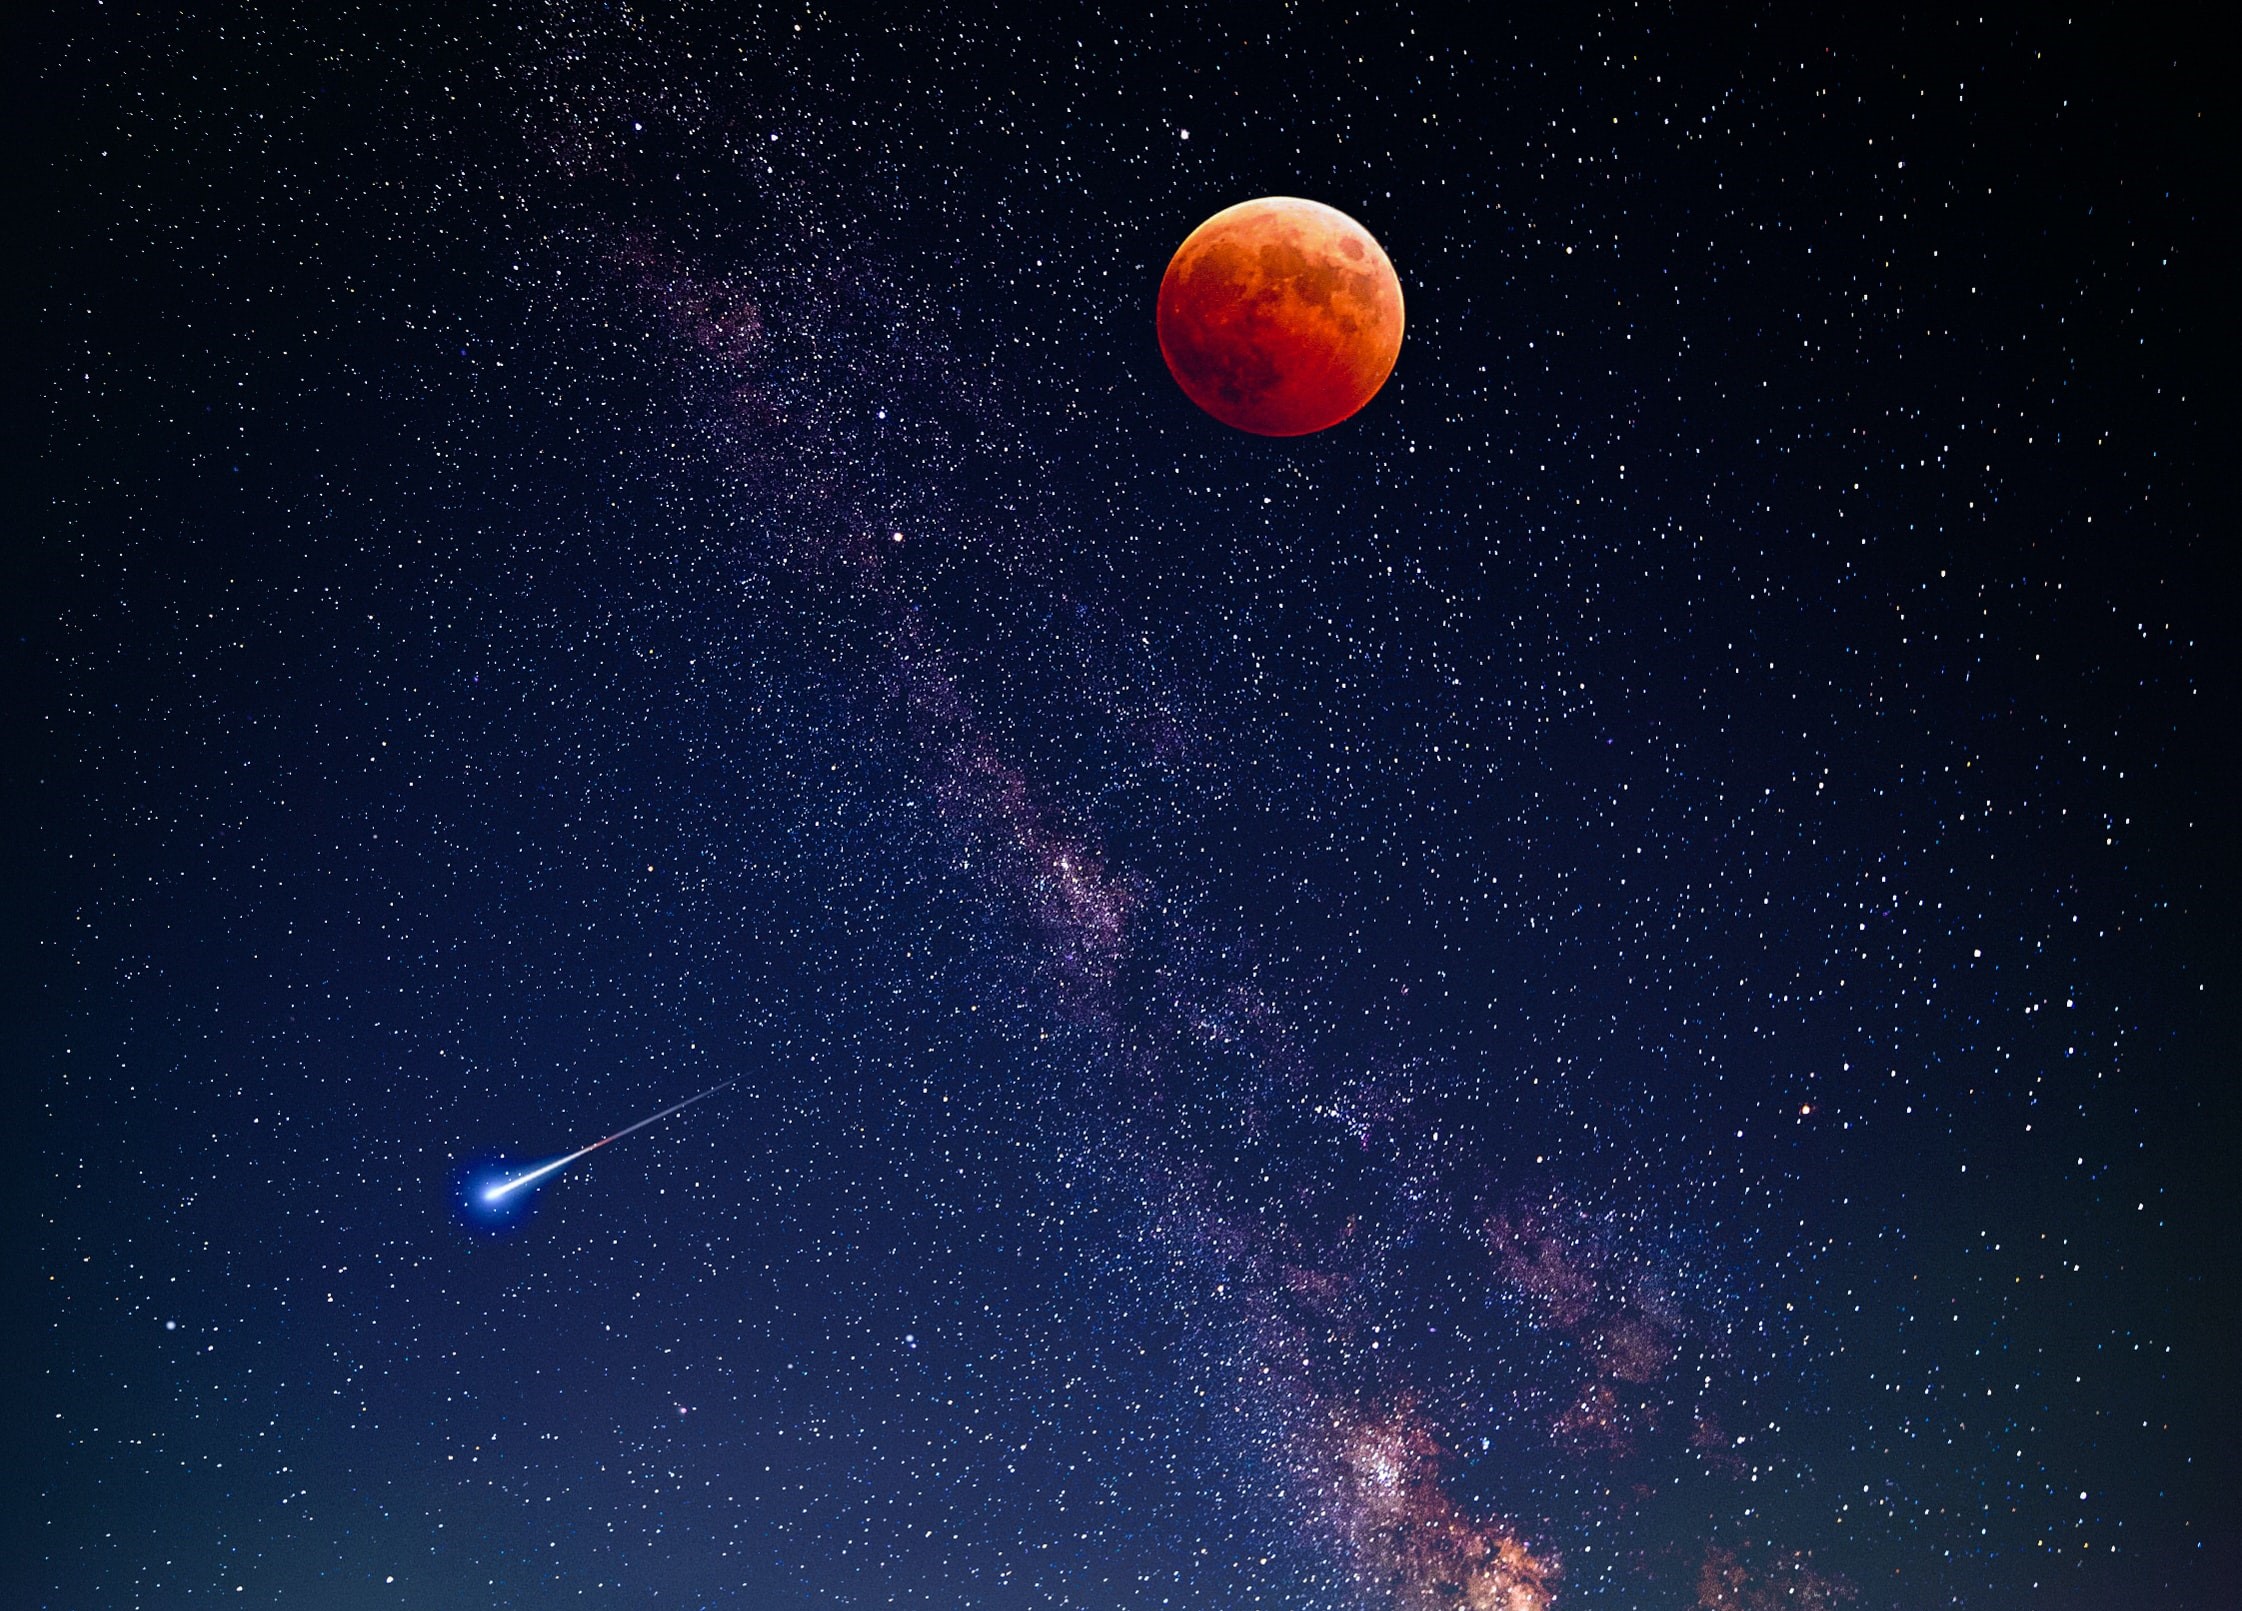 blood moon, milky way, and shooting star